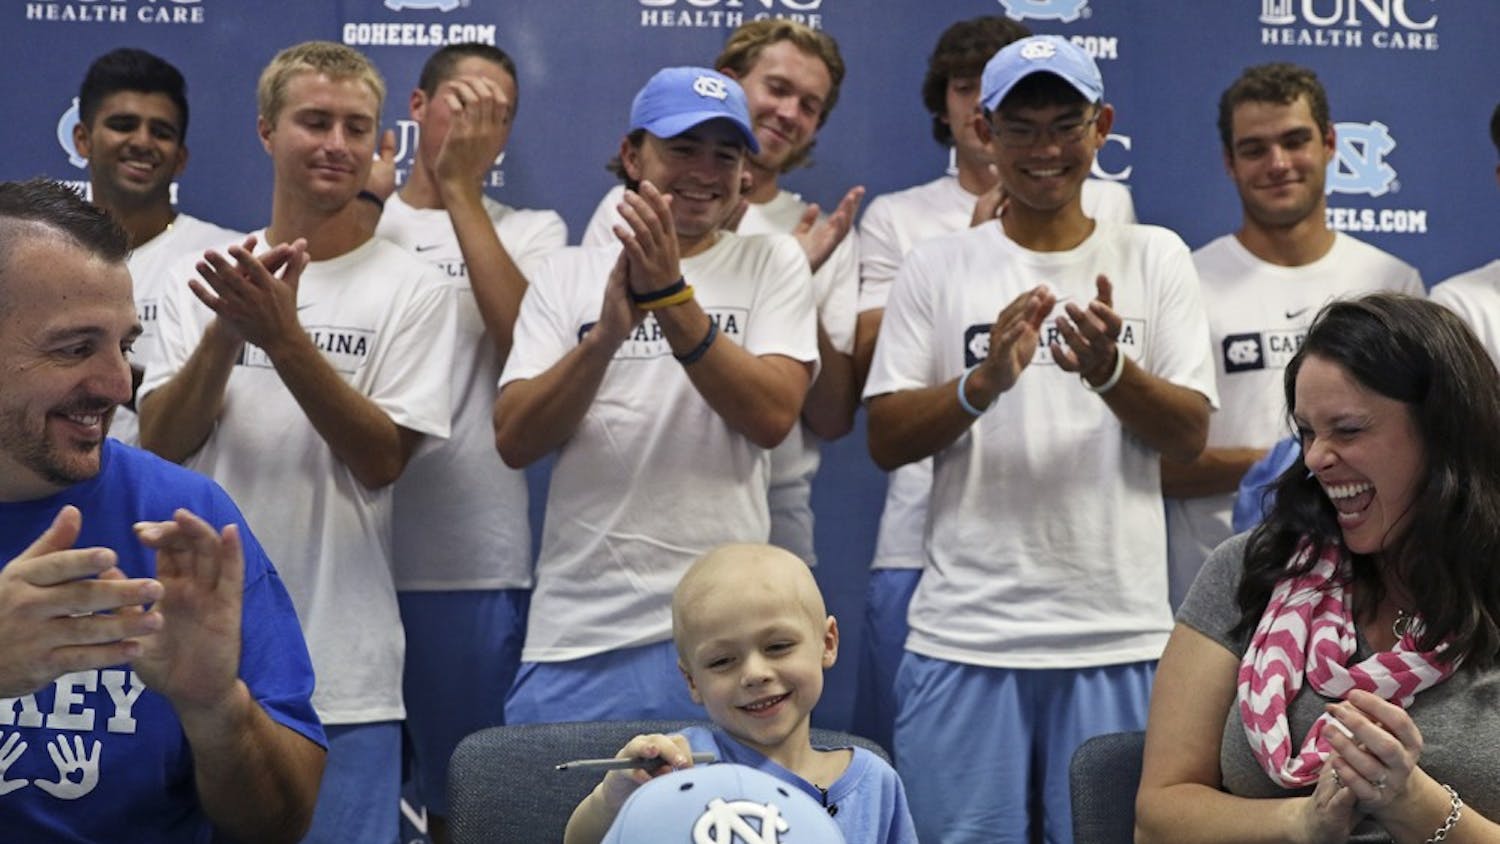 5-year-old&nbsp;Mick&nbsp;Macholl was officially signed to the UNC men's tennis team in November. This was an honorary gesture for Mick, who died after an 18-month battle with&nbsp;neuroblastoma on Dec. 13.